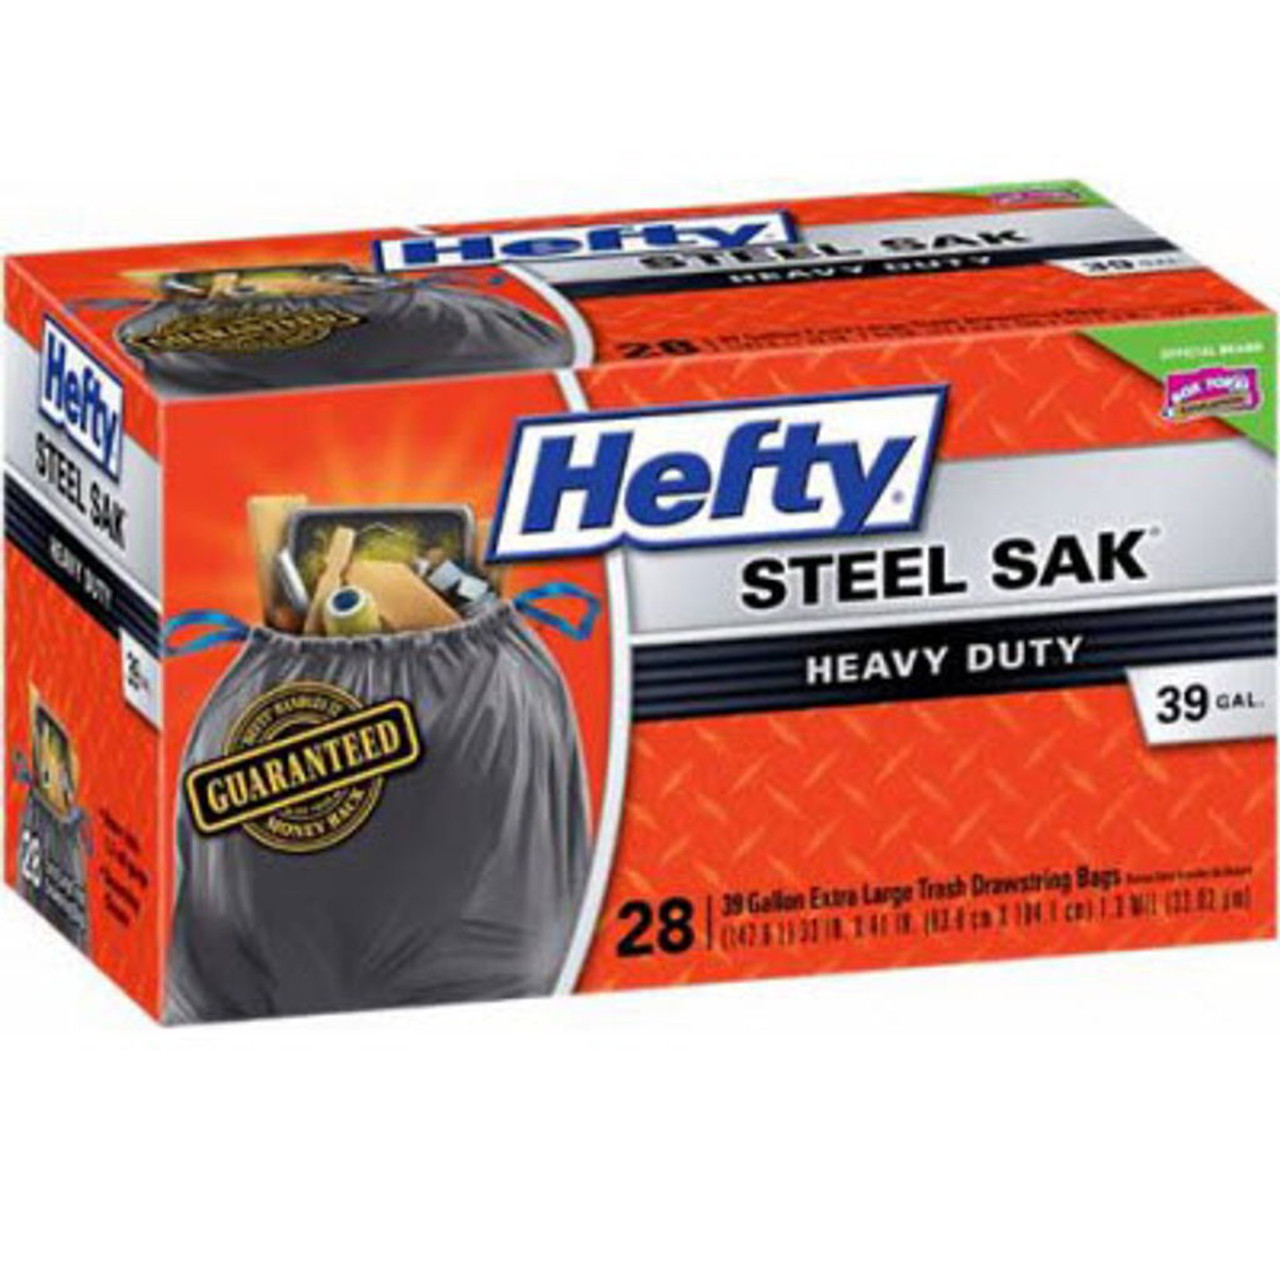 Hefty Heavy Duty Contractor Extra Large Trash Bags, 45 Gallon, 20 Count